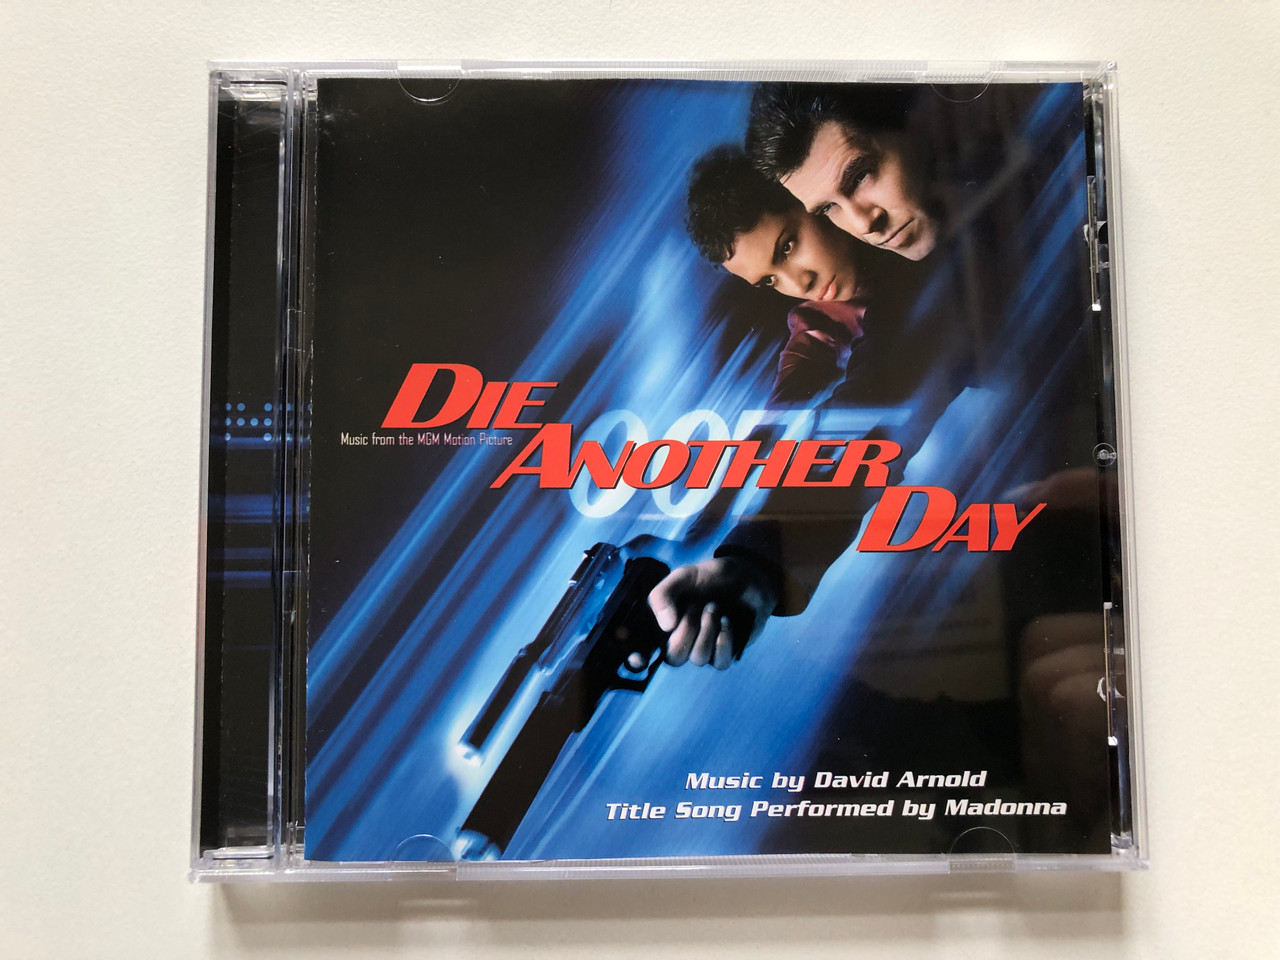 https://cdn10.bigcommerce.com/s-62bdpkt7pb/products/0/images/313345/Die_Another_Day_Music_From_The_MGM_Motion_Picture_-_Music_By_David_Arnold_Title_Song_Performed_By_Madonna_Warner_Bros._Records_Audio_CD_2002_9362-48348-2_1__03677.1700744286.1280.1280.JPG?c=2